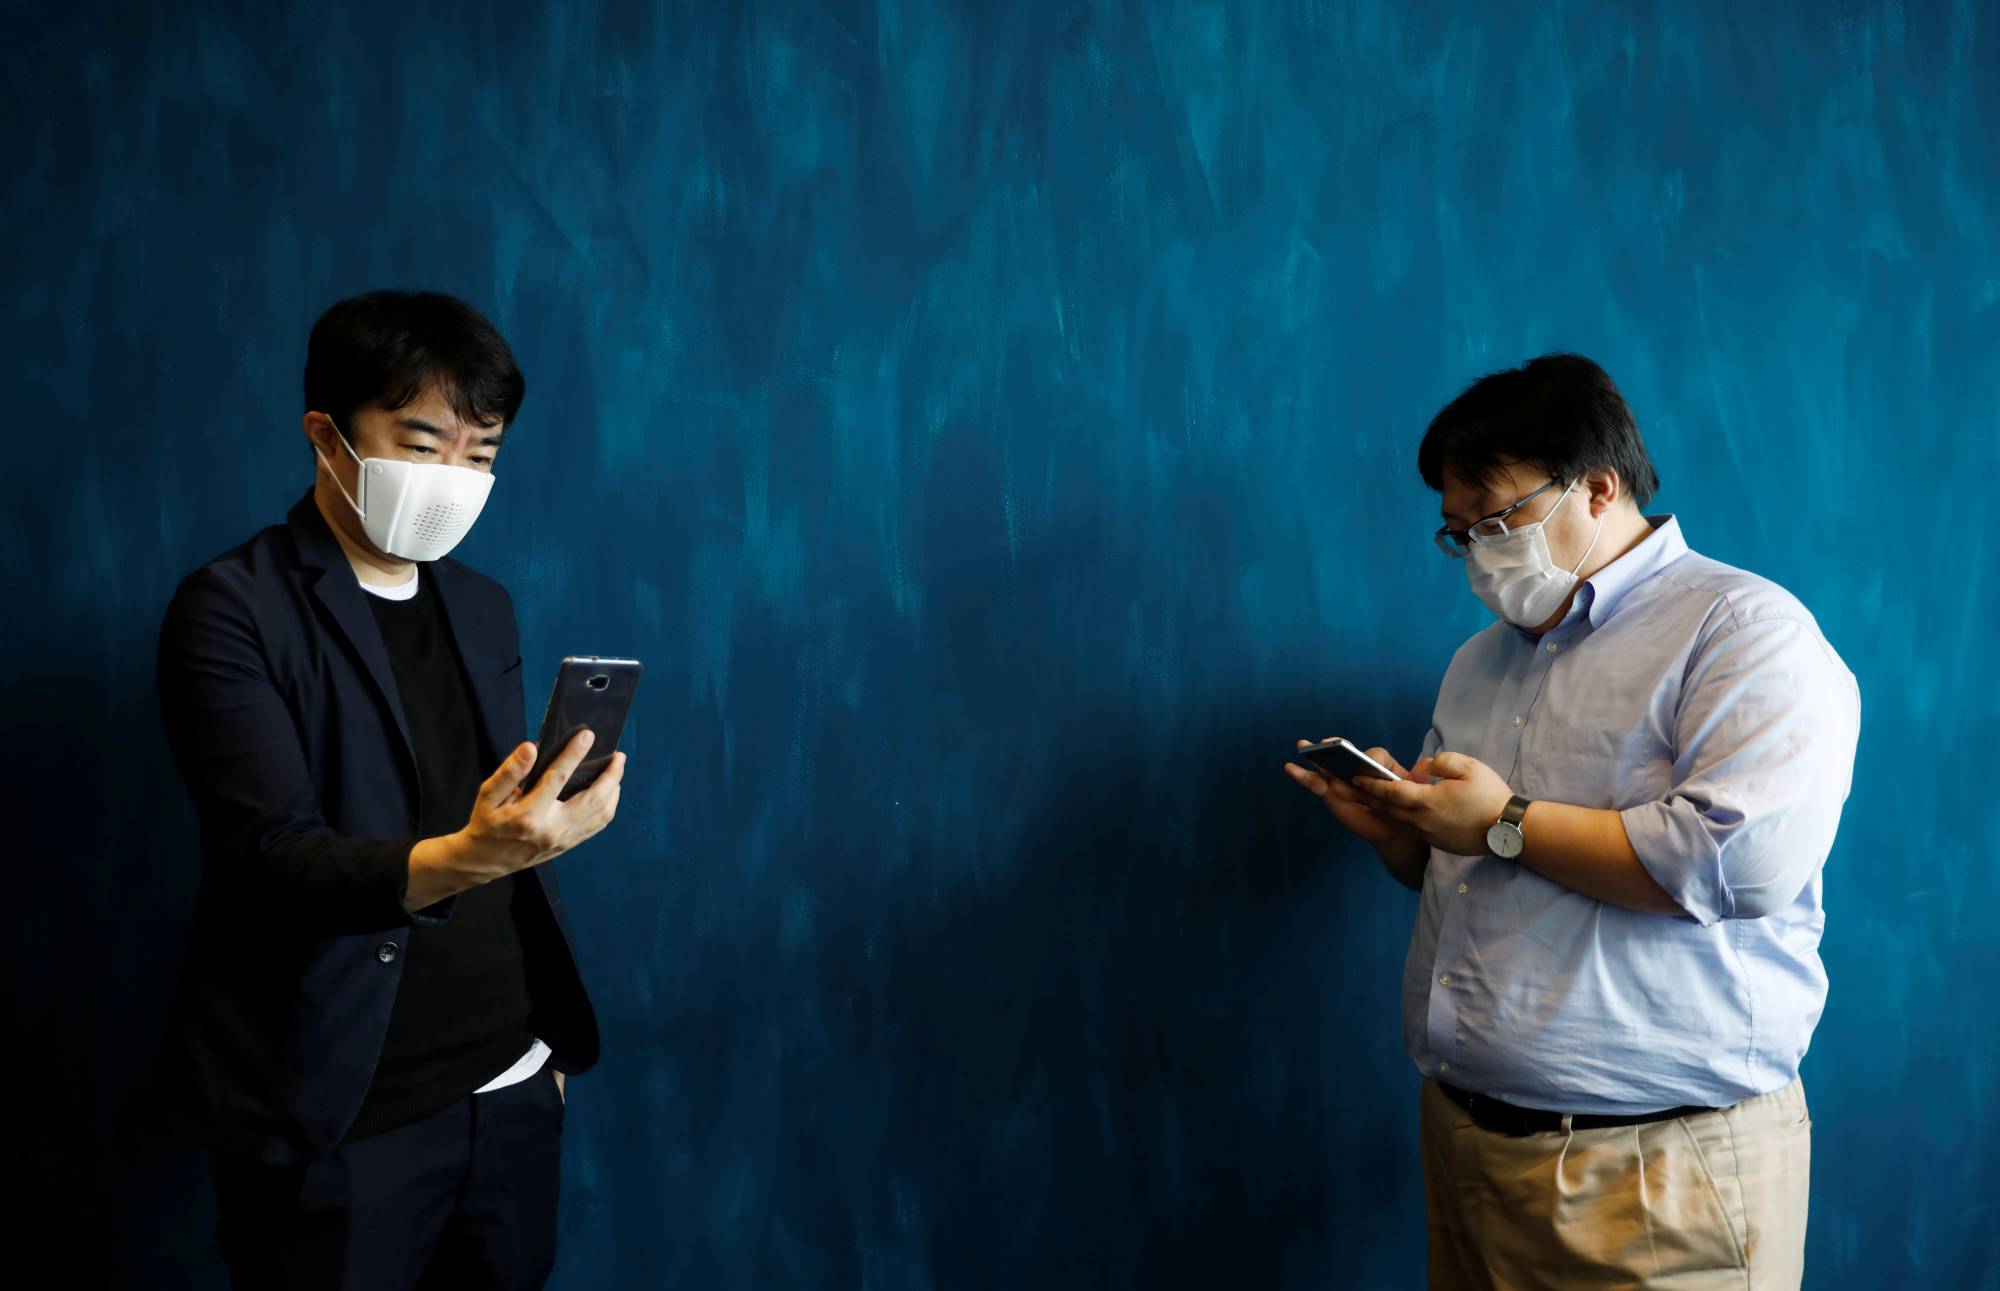 Japanese startup Donut Robotics' CEO Taisuke Ono wears a c-mask as he demonstrates the connected face masks messaging function with his chief engineer, Takafumi Okabe, during a demonstration in Tokyo on Tuesday. | REUTERS